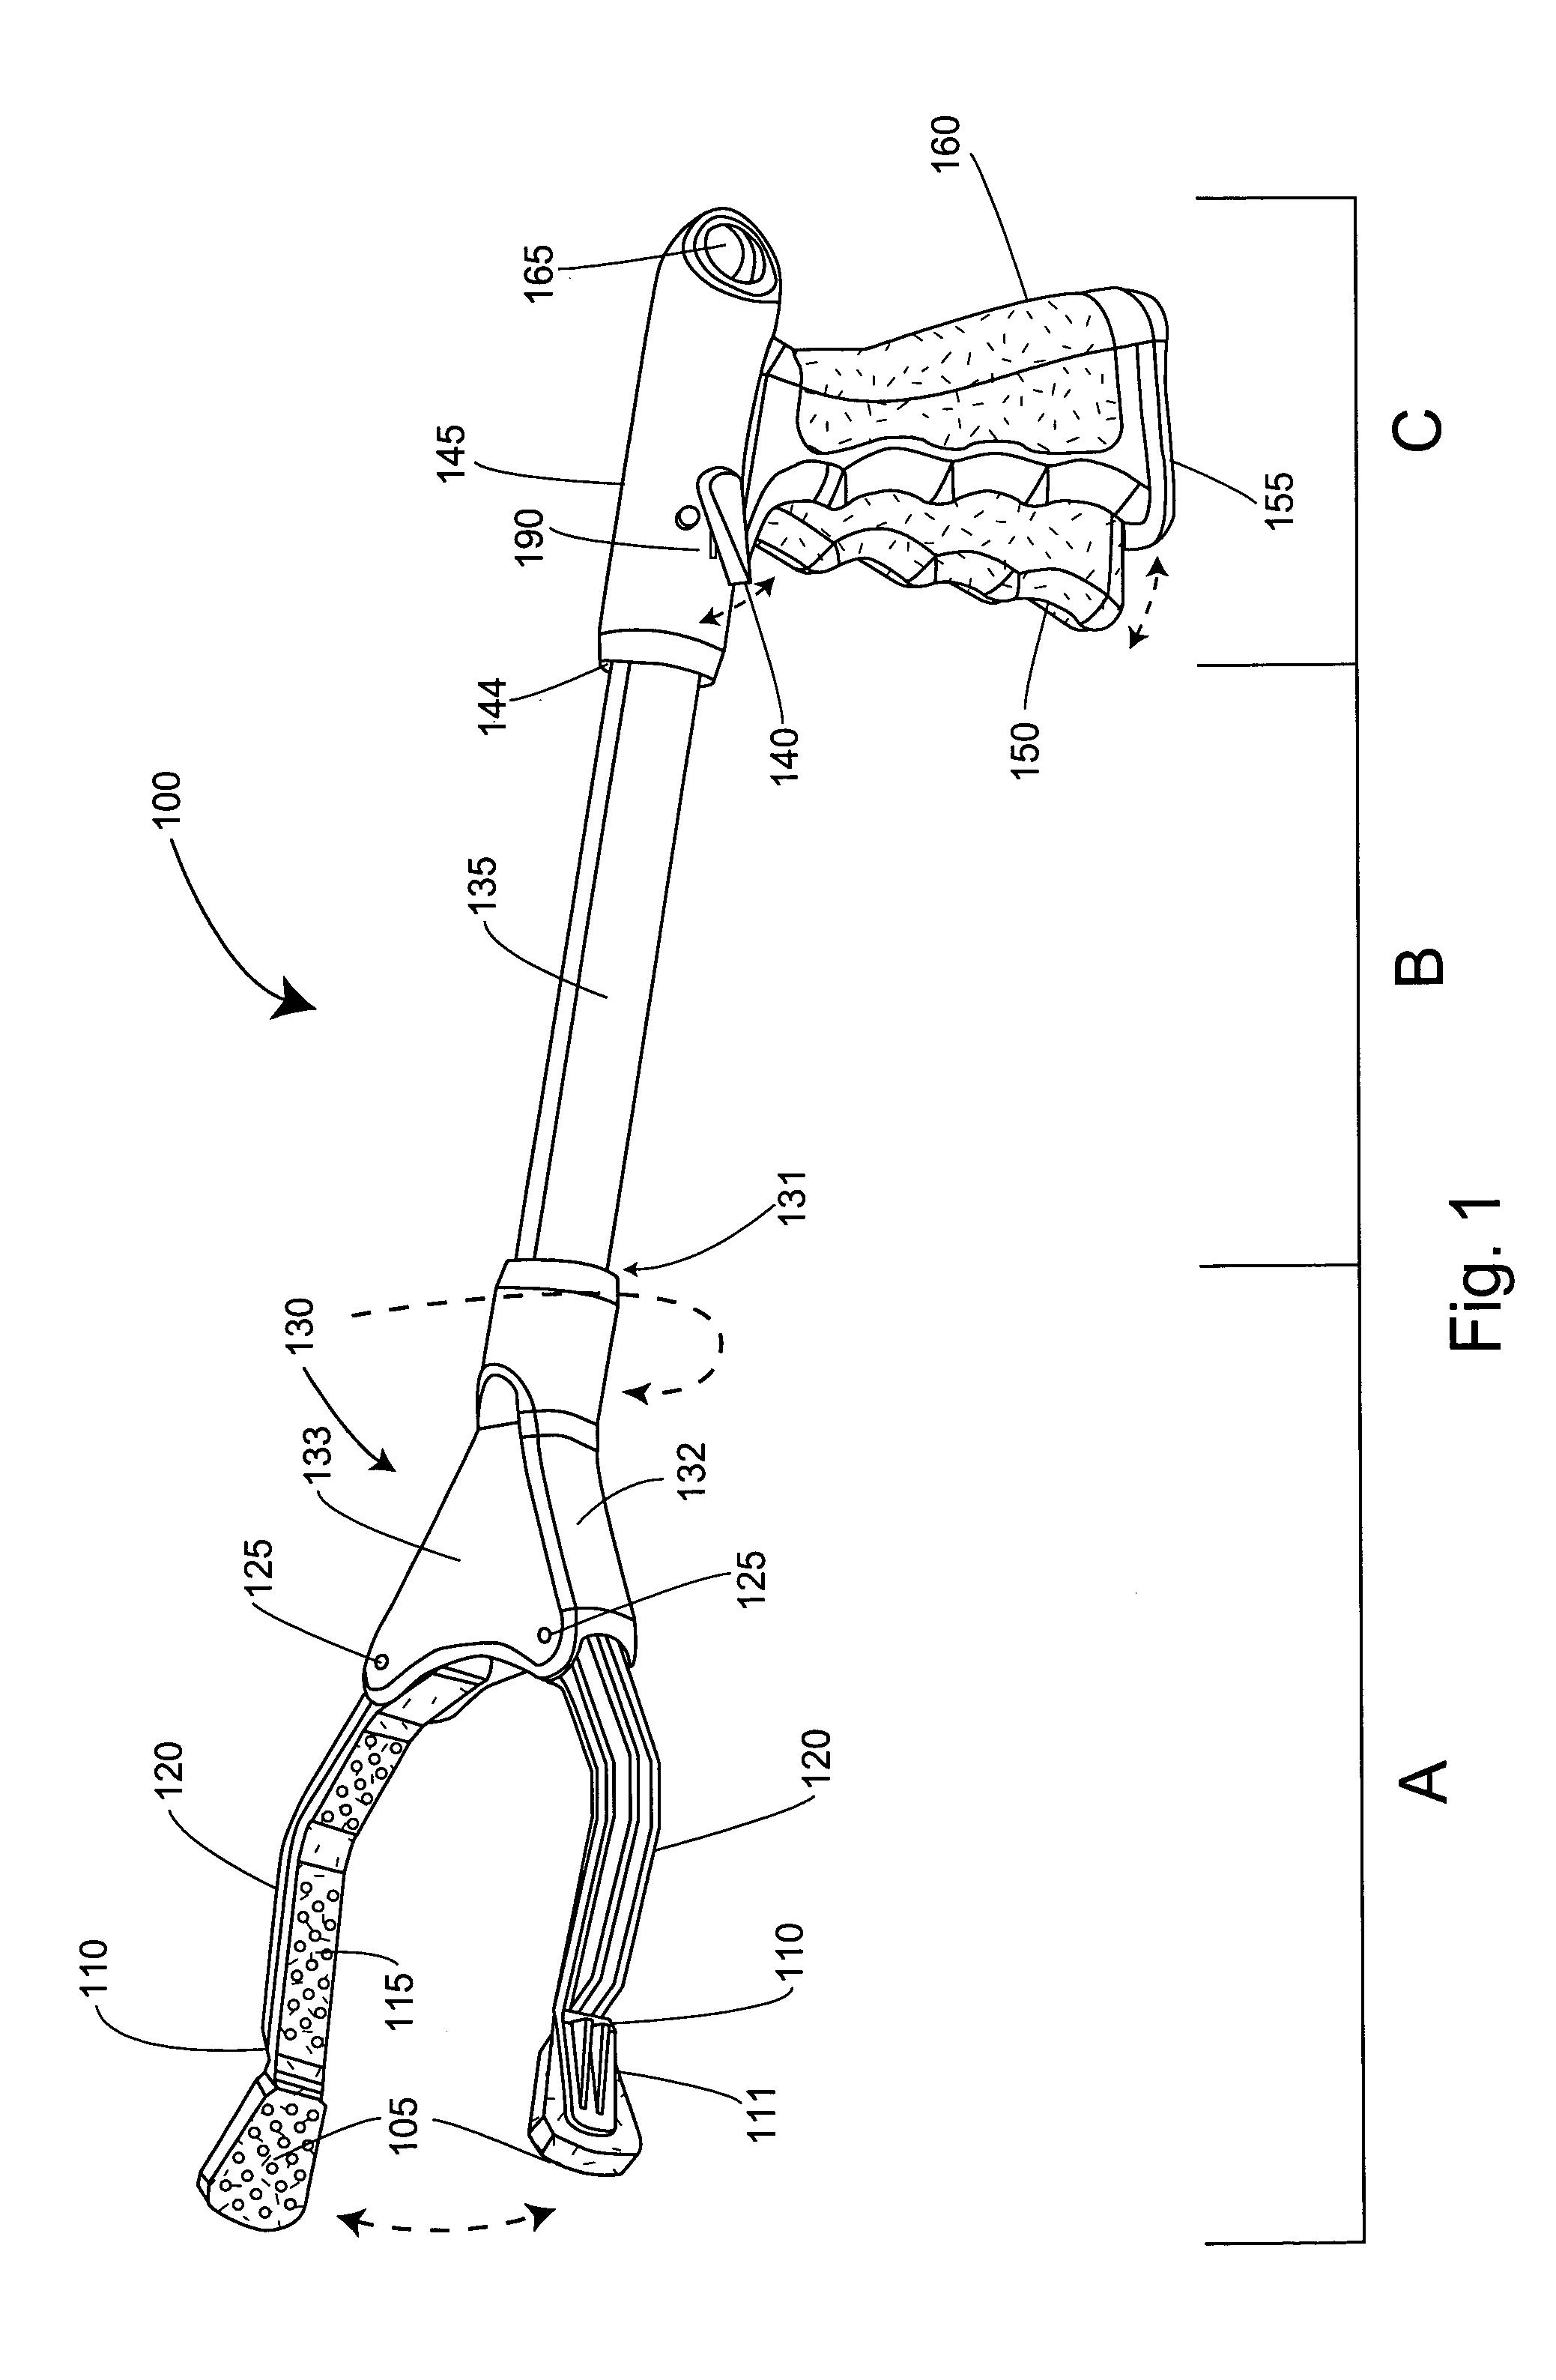 Pick up device with locking mechanism and leverage action trigger